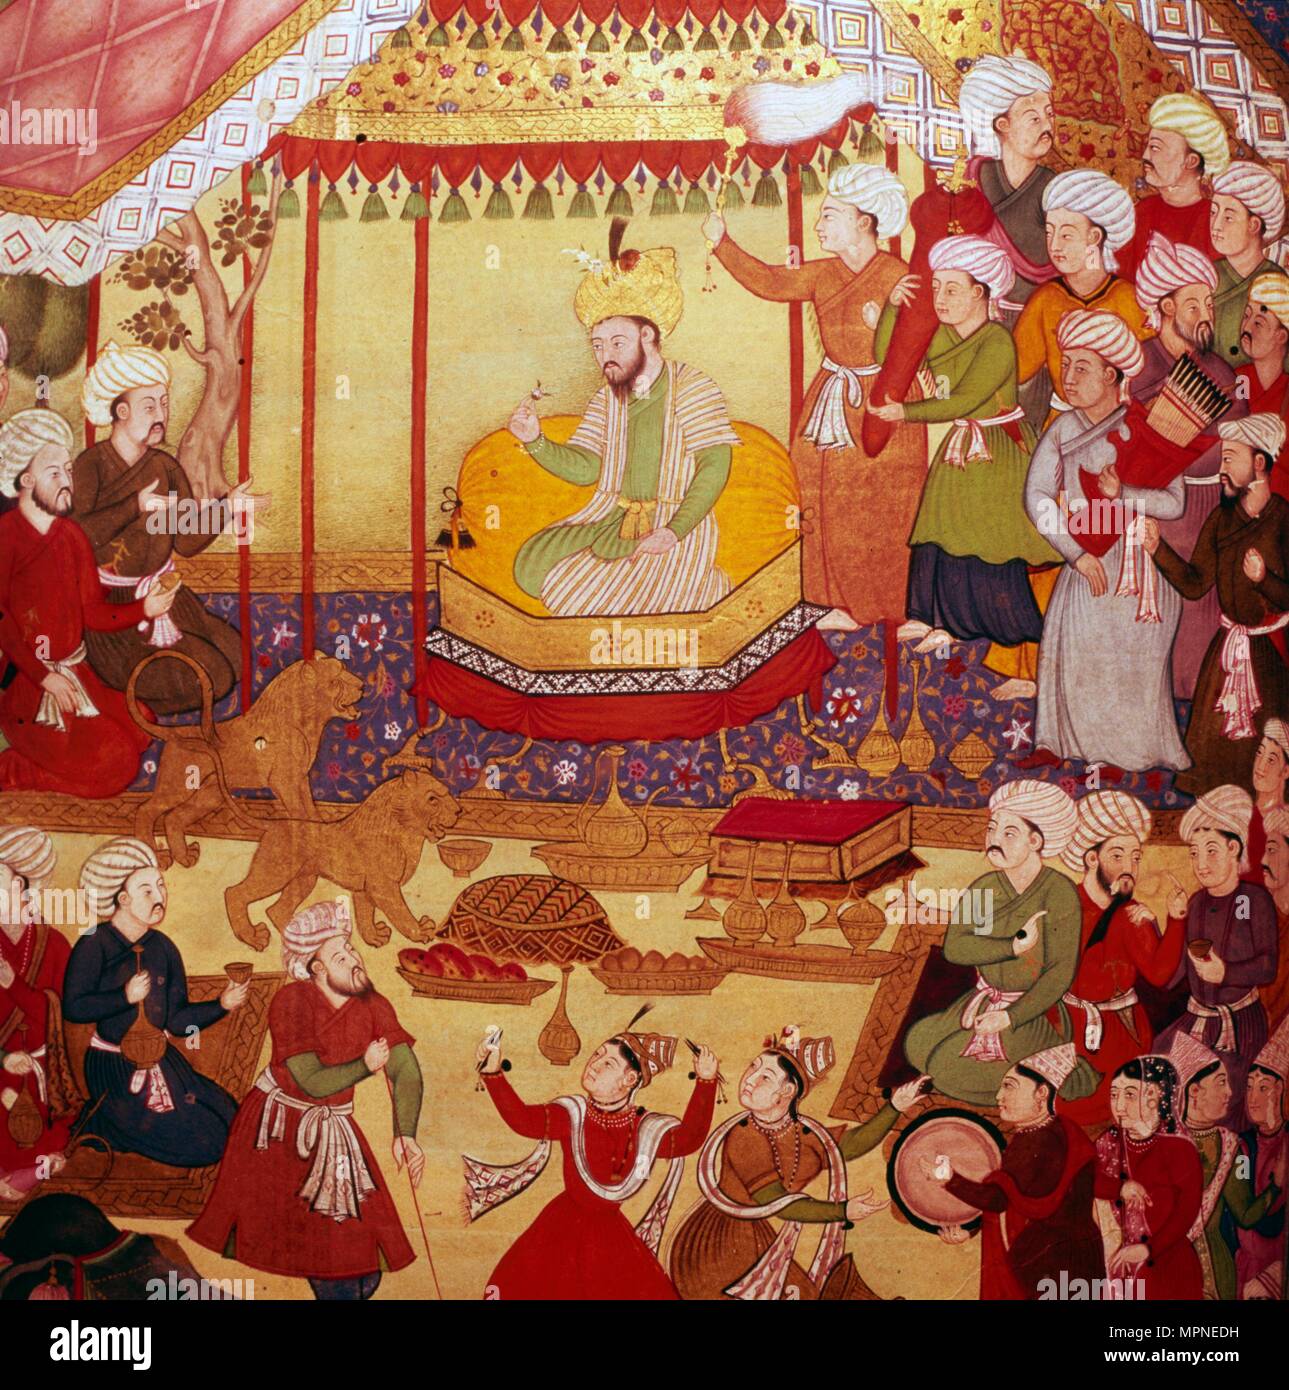 Timur enthroned during celebrations, Mughal manuscript, 1600-1601. Artist: Unknown. Stock Photo